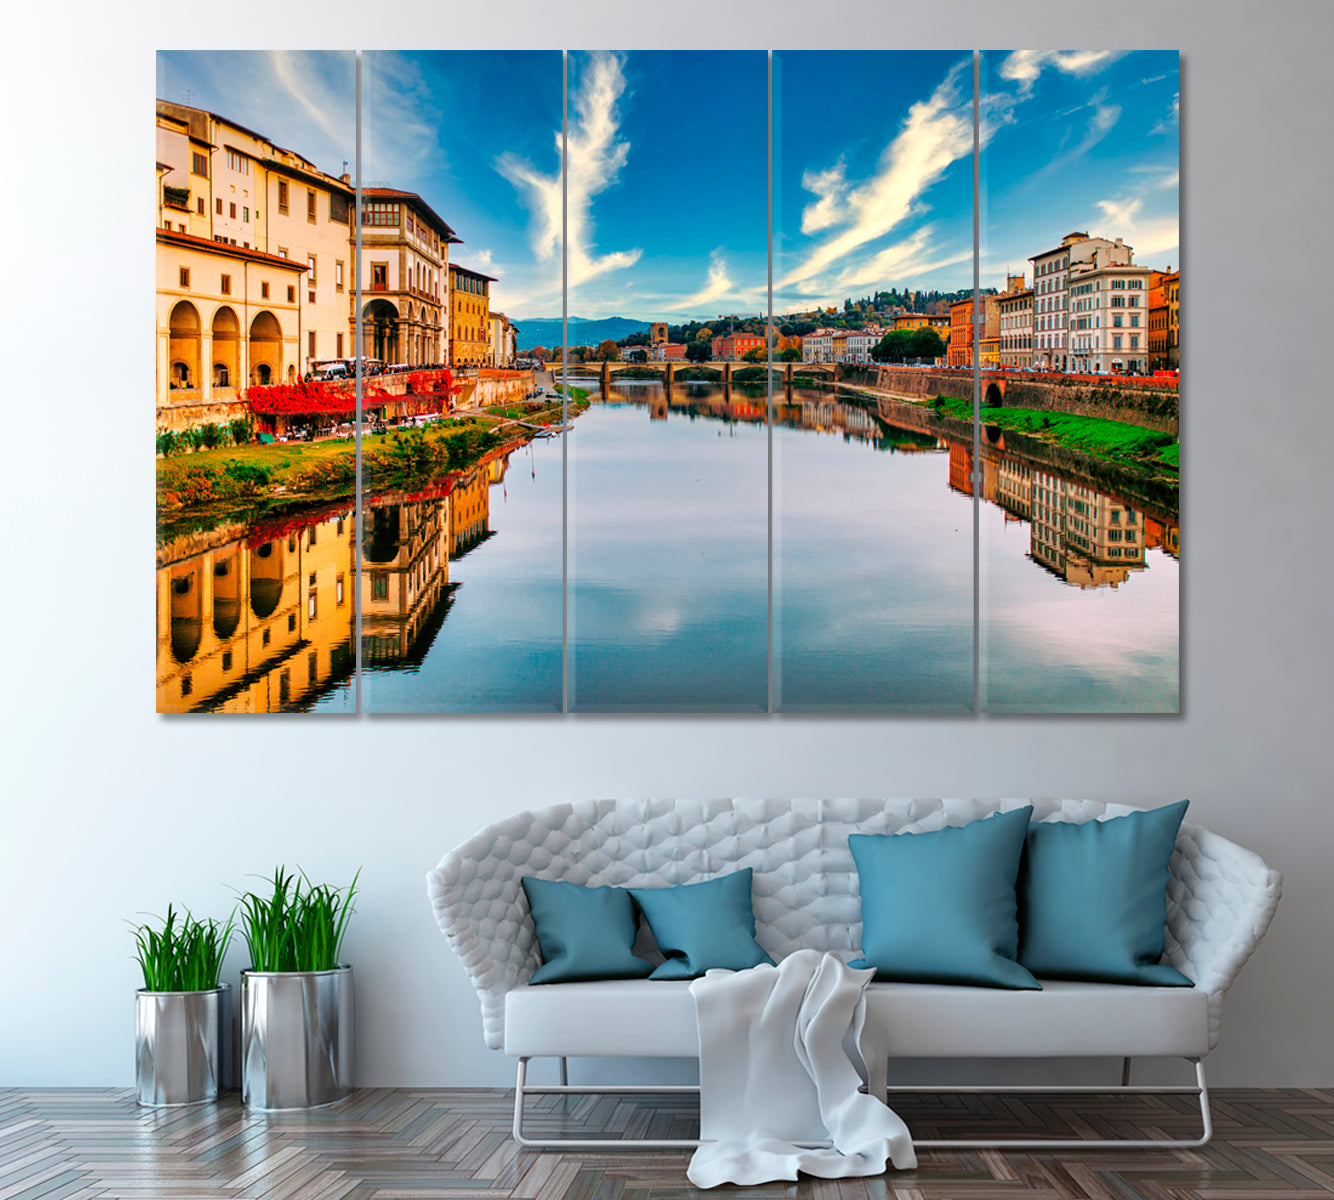 Arno River in Florence Canvas Print ArtLexy 5 Panels 36"x24" inches 